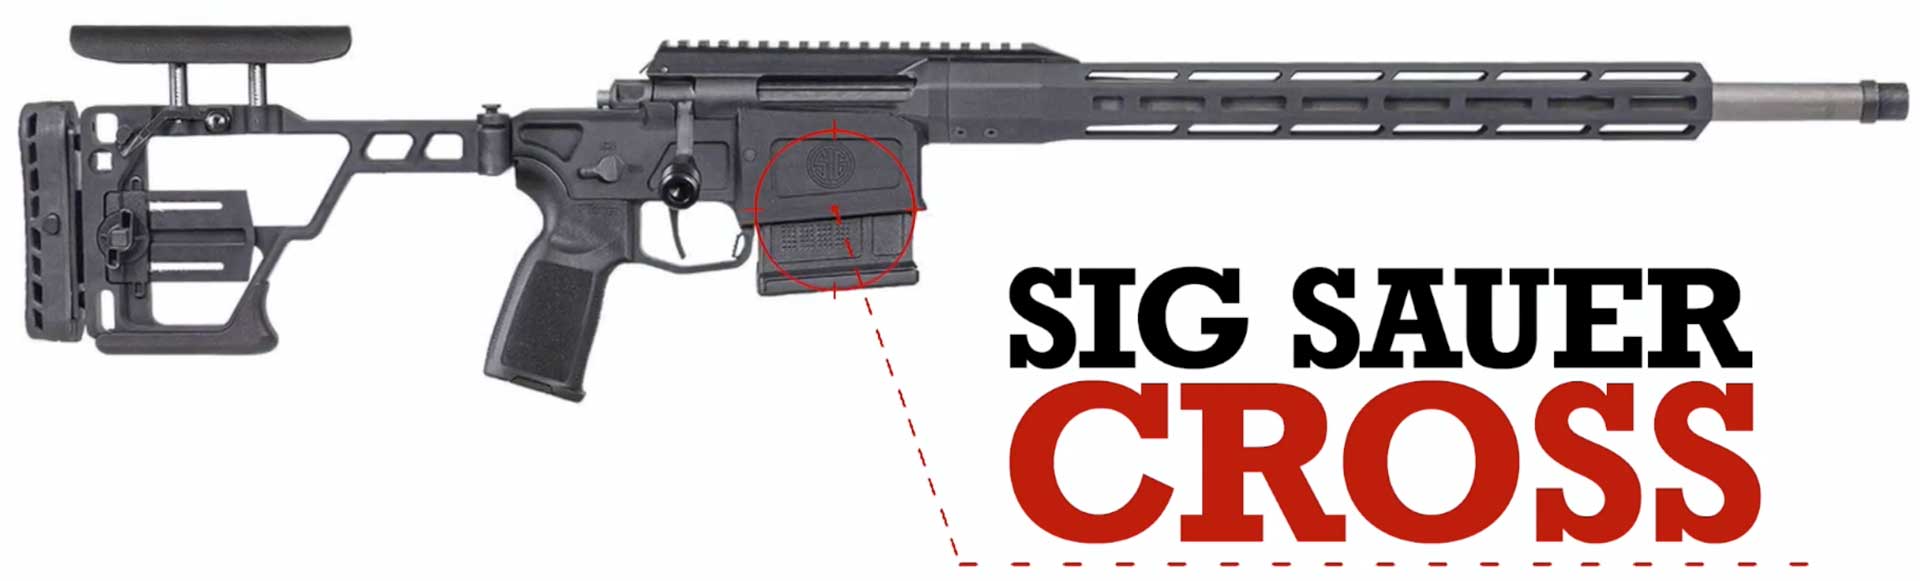 right side bolt-action rifle black metal plastic silver barrel text on image noting "SIG SAUER CROSS"